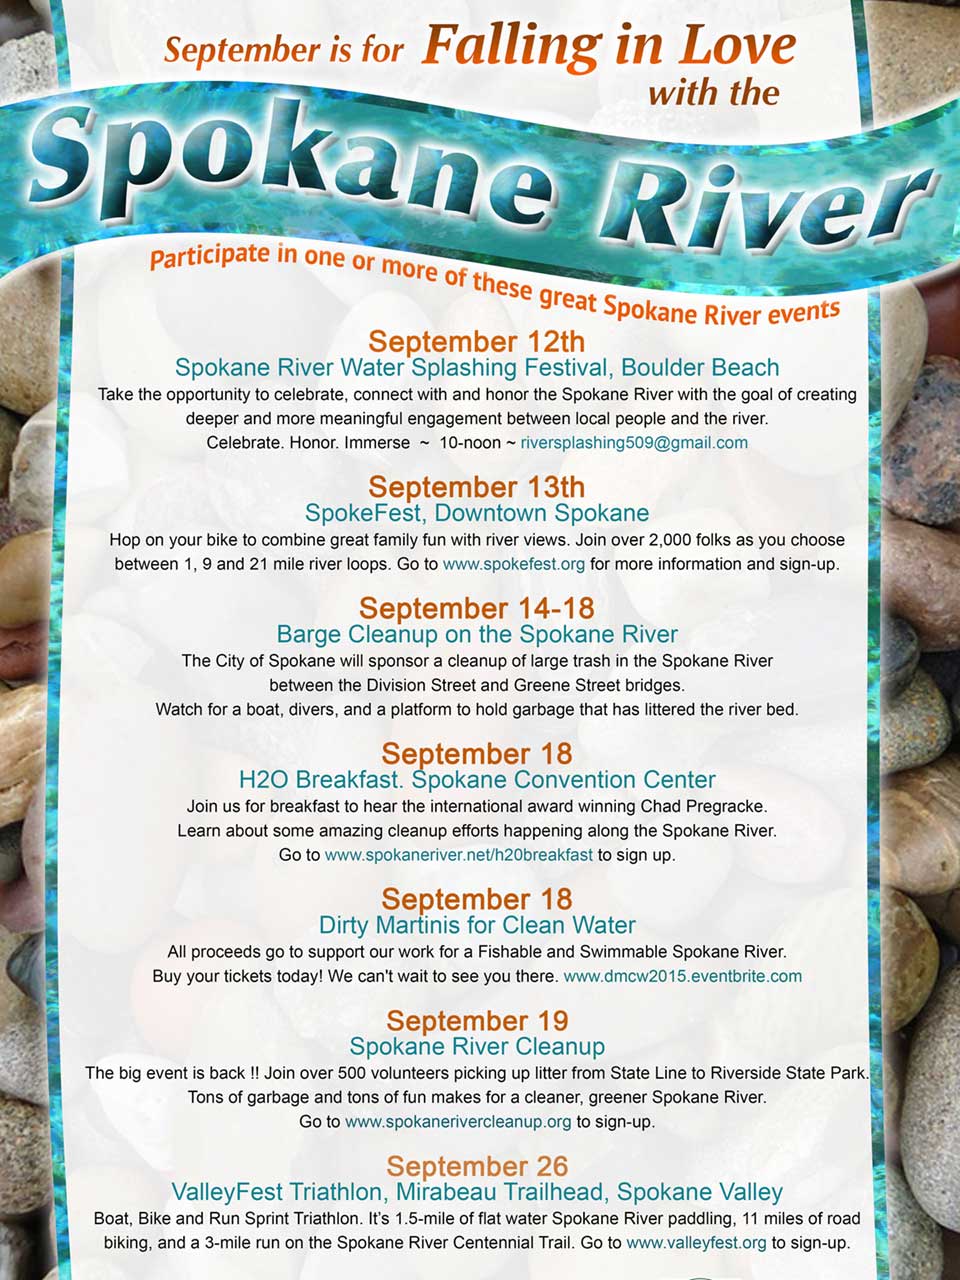 Fall in love with the Spokane River poster